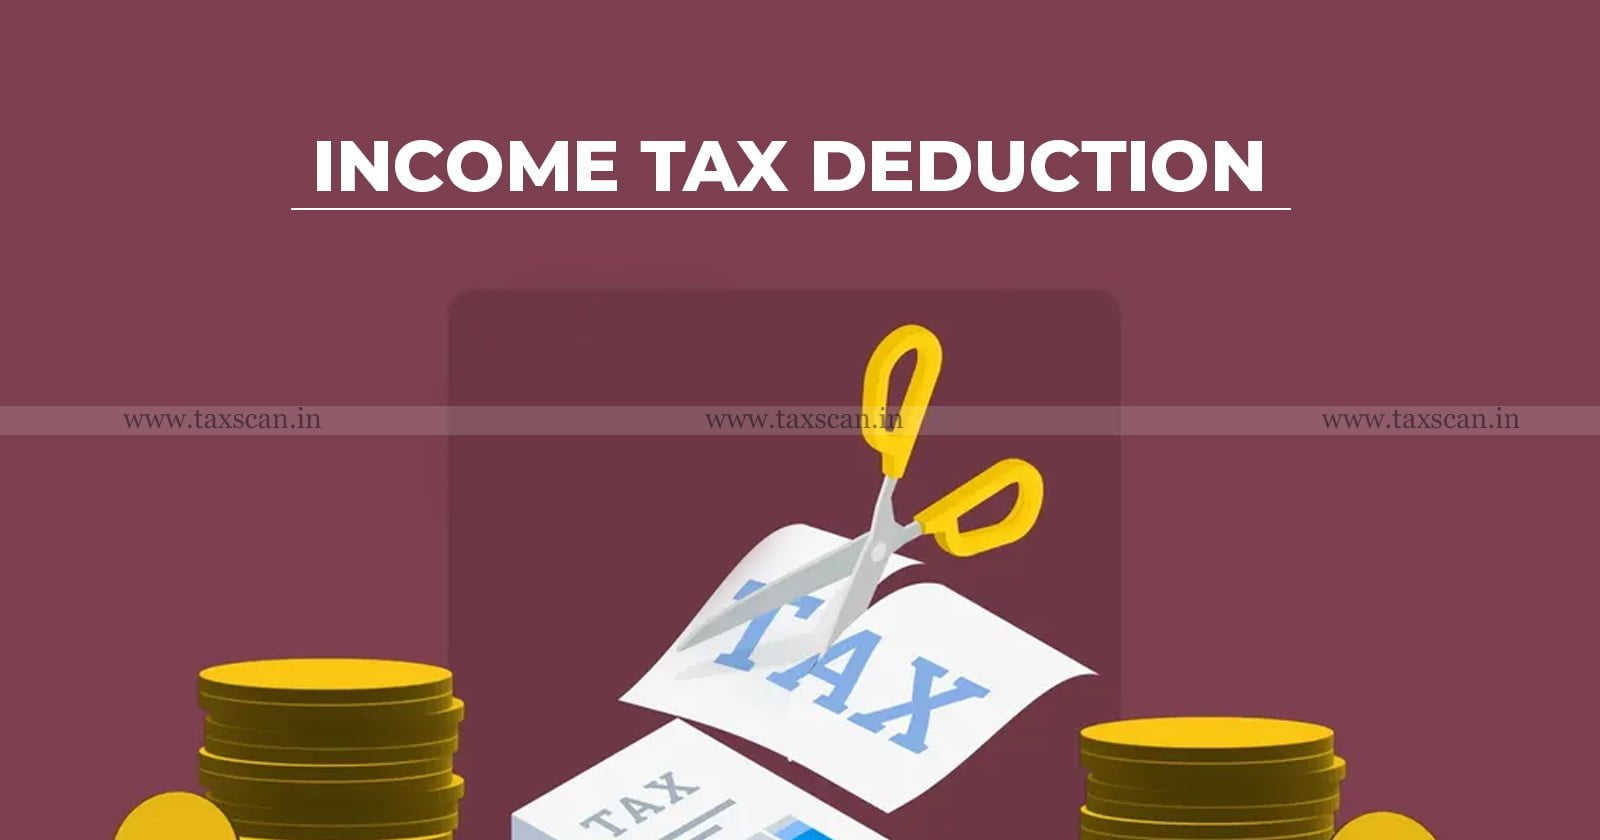 Income Tax Deduction - Income Tax - Deduction - Commission Payments - Commission - Examination - Verification - Agreement between Payer and Dealers - Payer and Dealers - ITAT - Taxscan